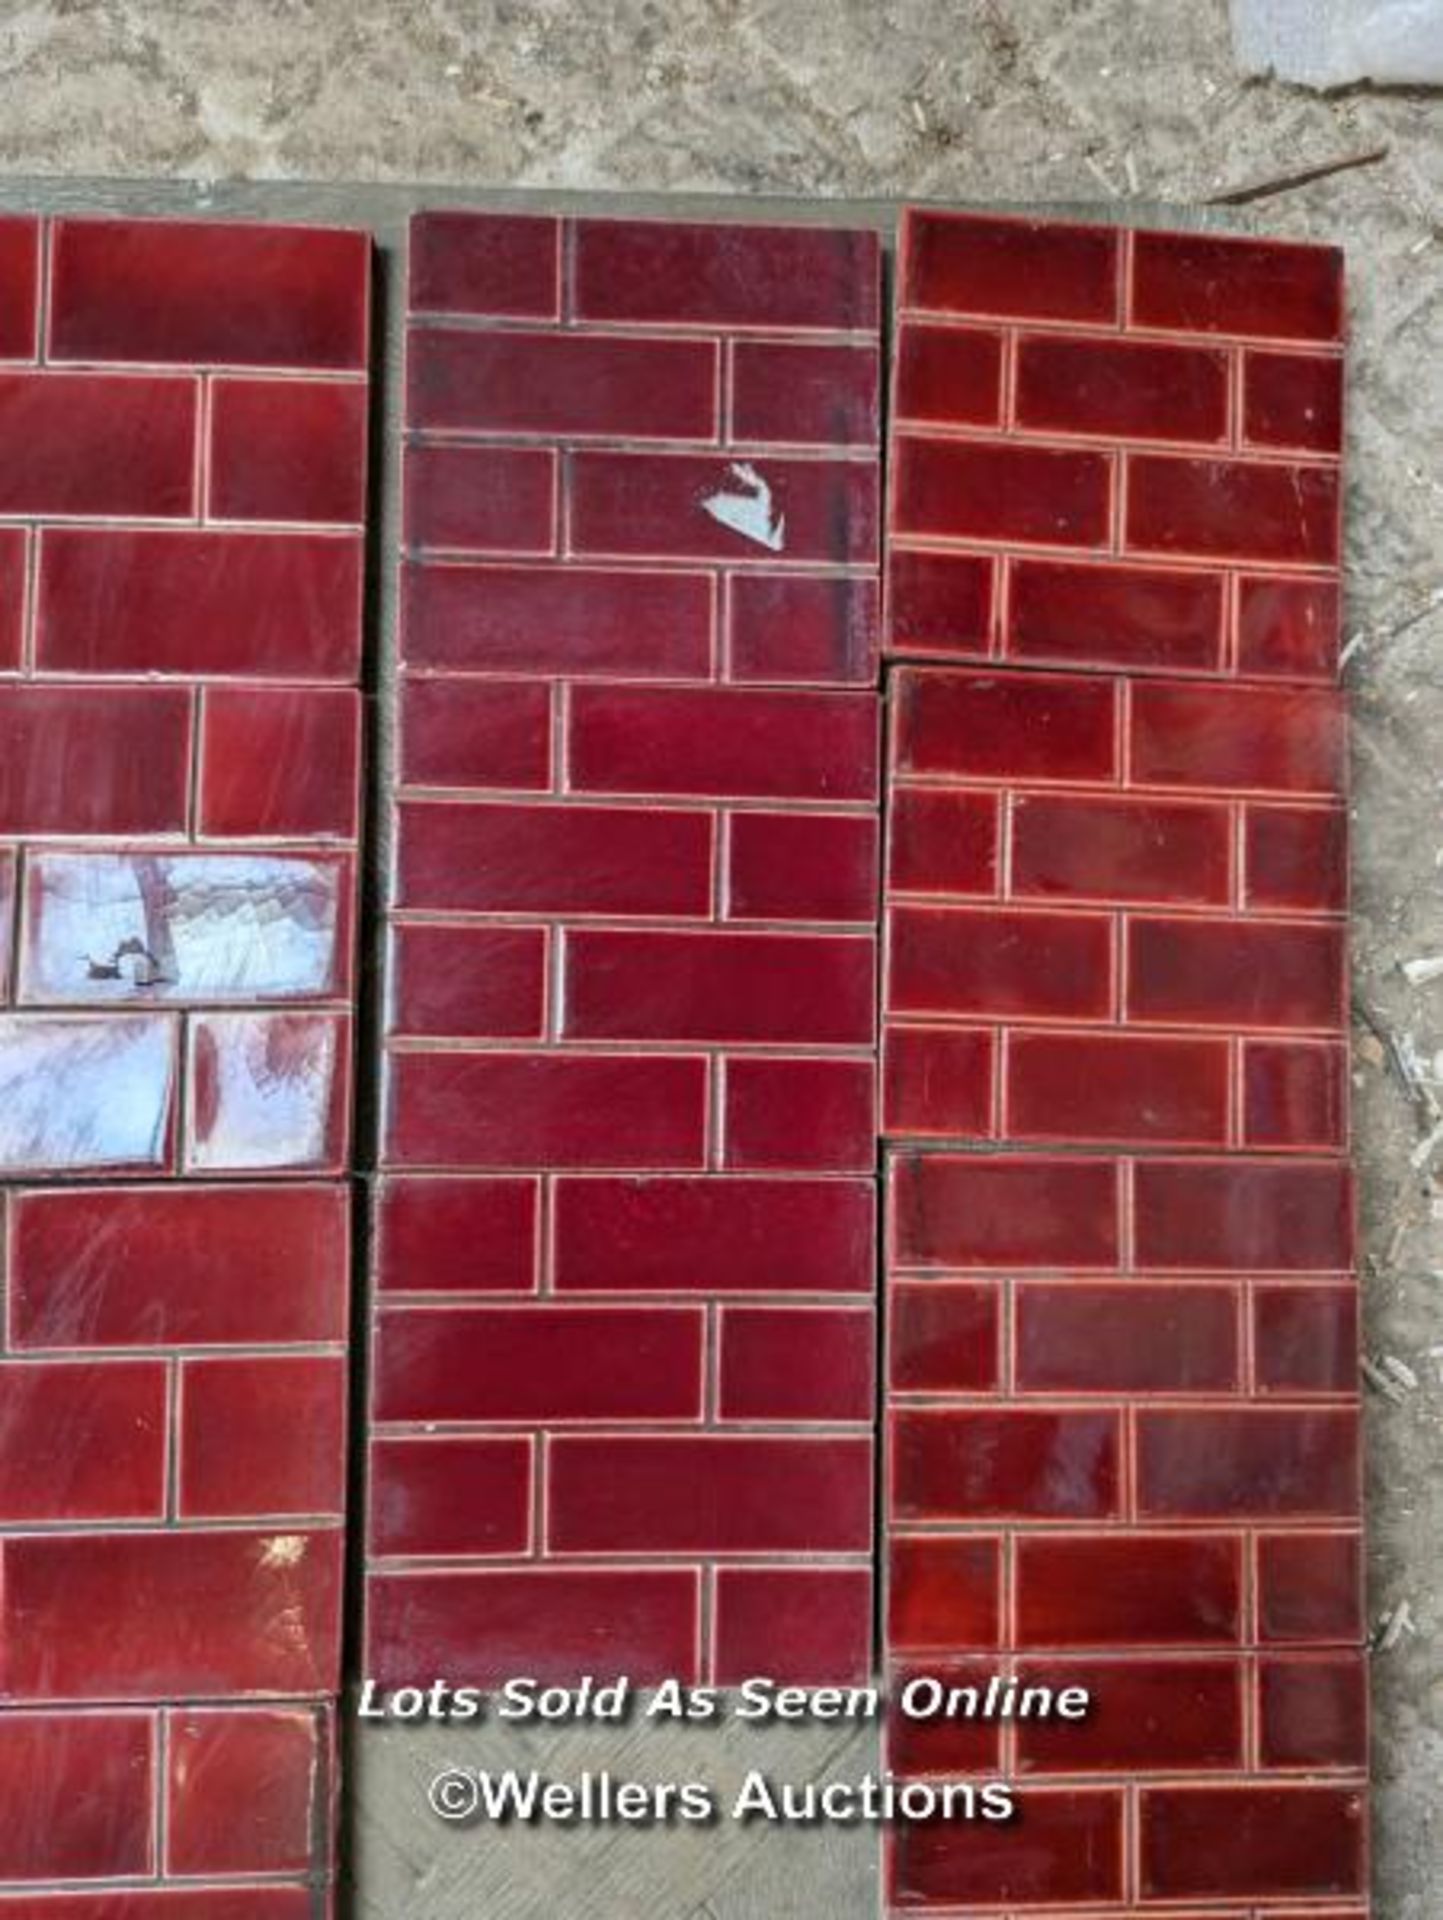 Mixed batch of 22 red/brown Edwardian brick fireplace or hearth tiles. 6" x 6" - Image 4 of 6